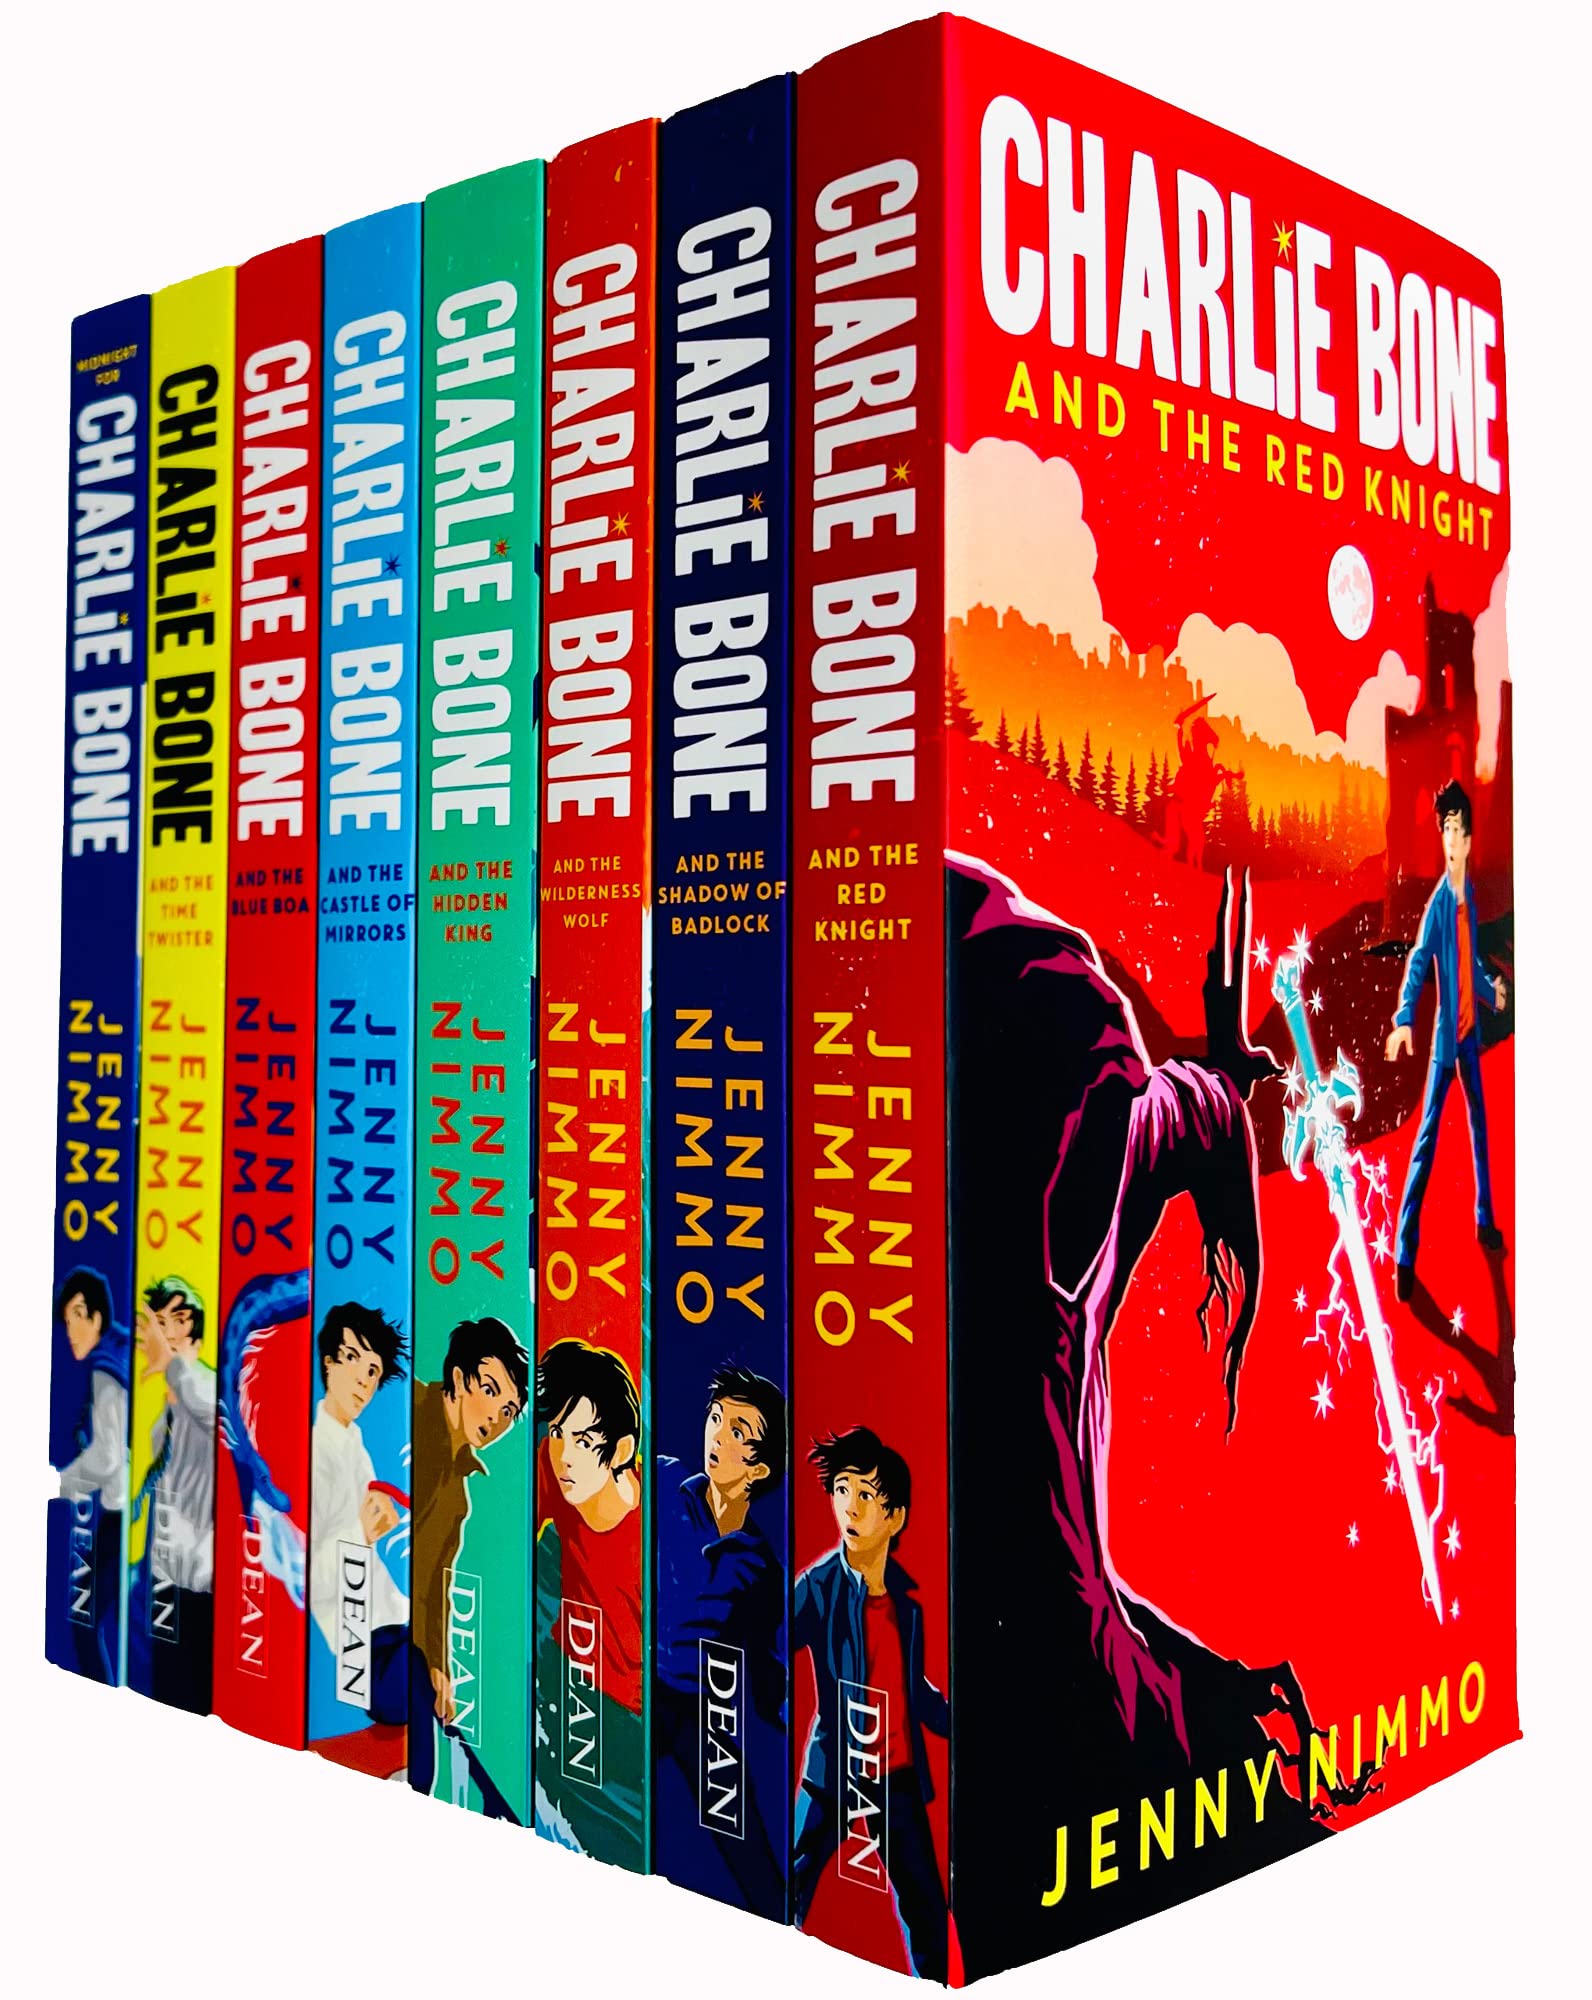 Children Of The Red King Charlie Bone Series Books 1-8 Collection Set by Jenny Nimmo - Lets Buy Books